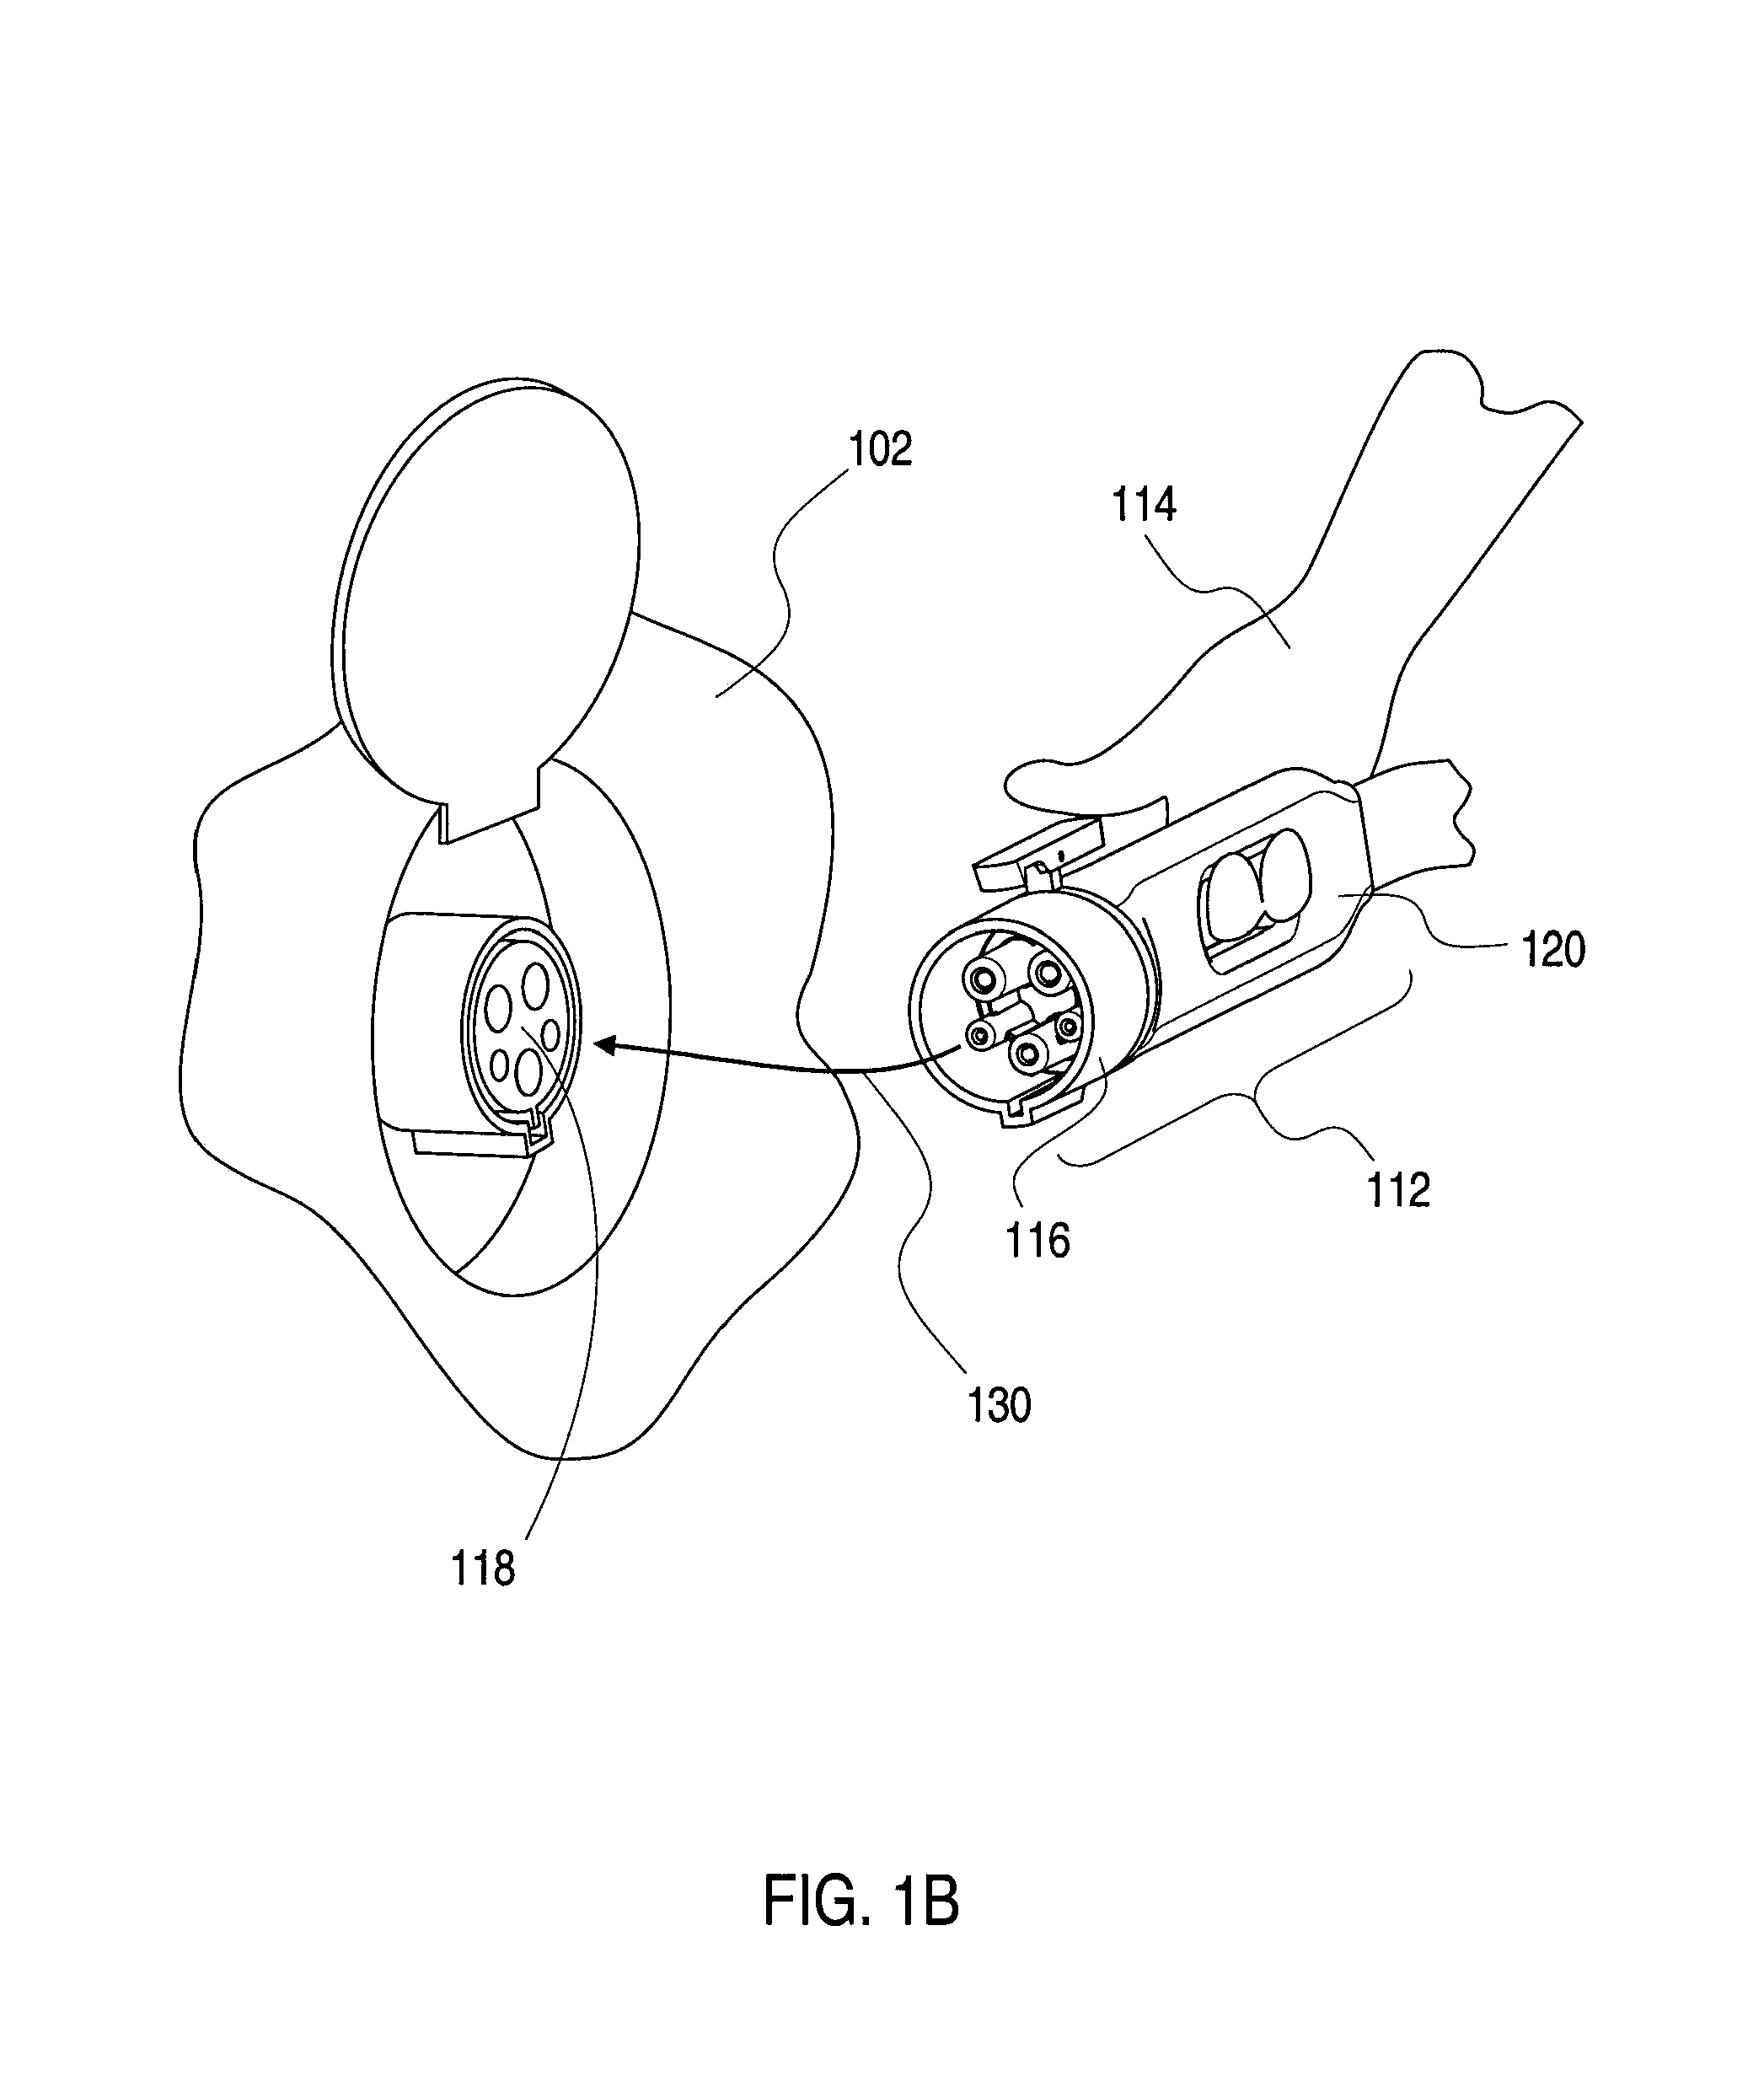 Electrical connector with a flexible blade-shaped housing with a handle with an opening